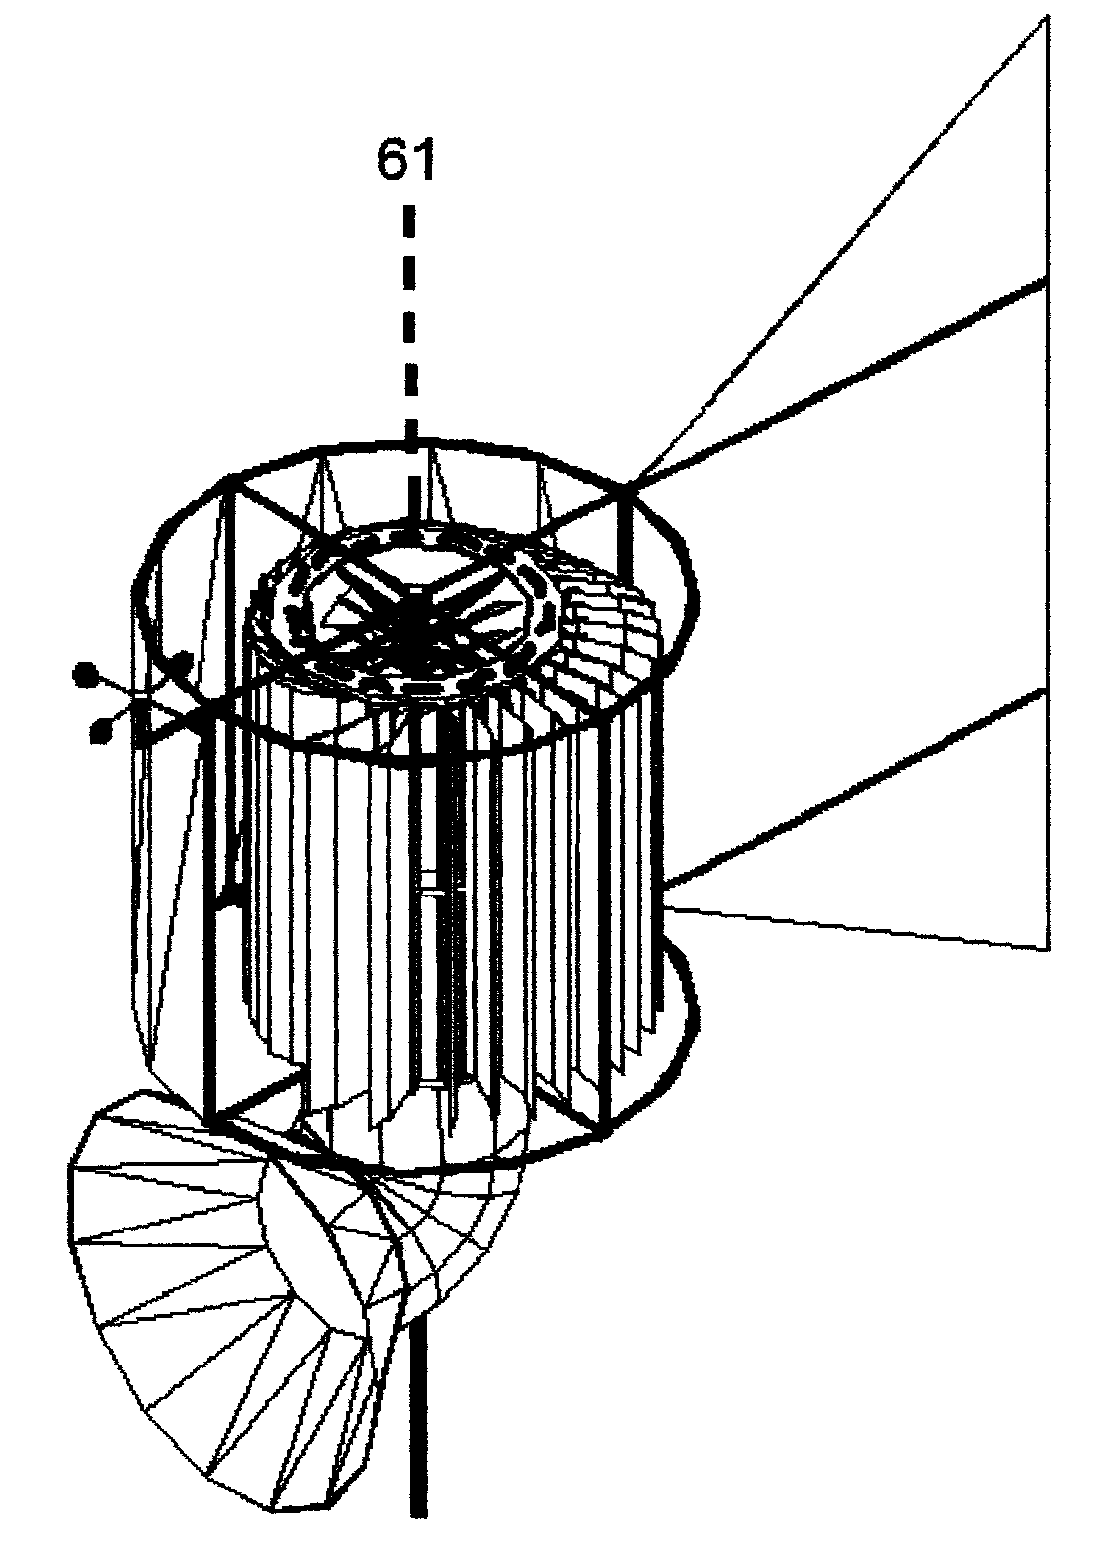 Vertical axis variable geometry wind energy collection system